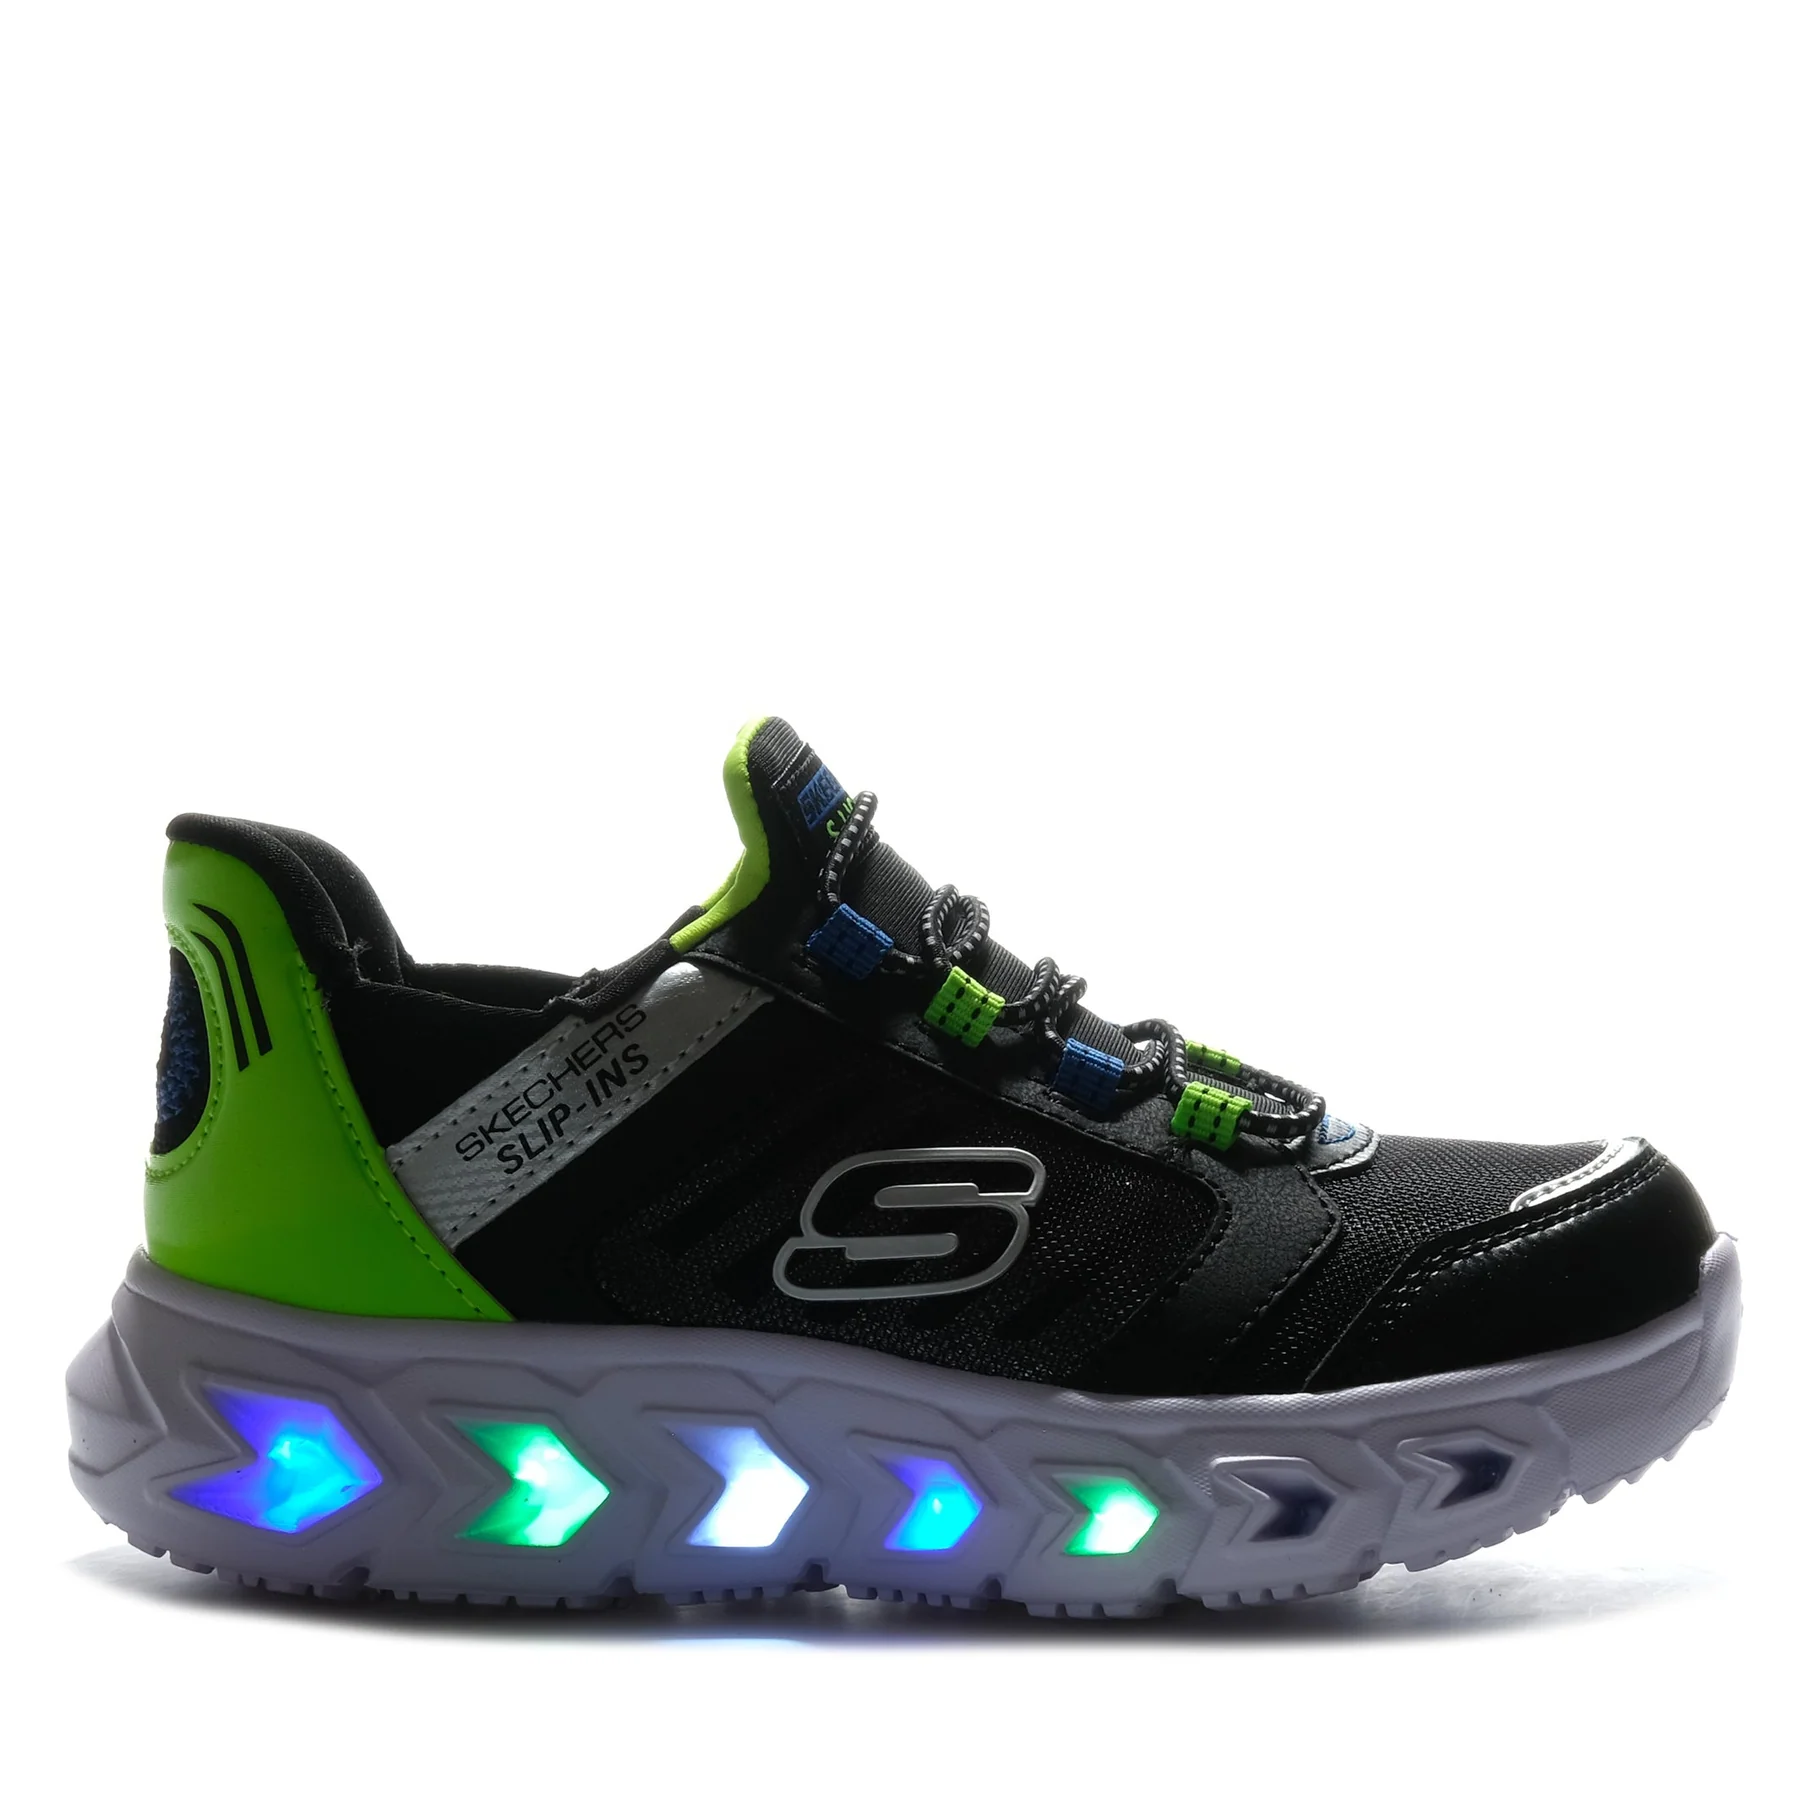 shadowed side view of the Skechers Hypno-Flash 2.0 - Odelux shoe